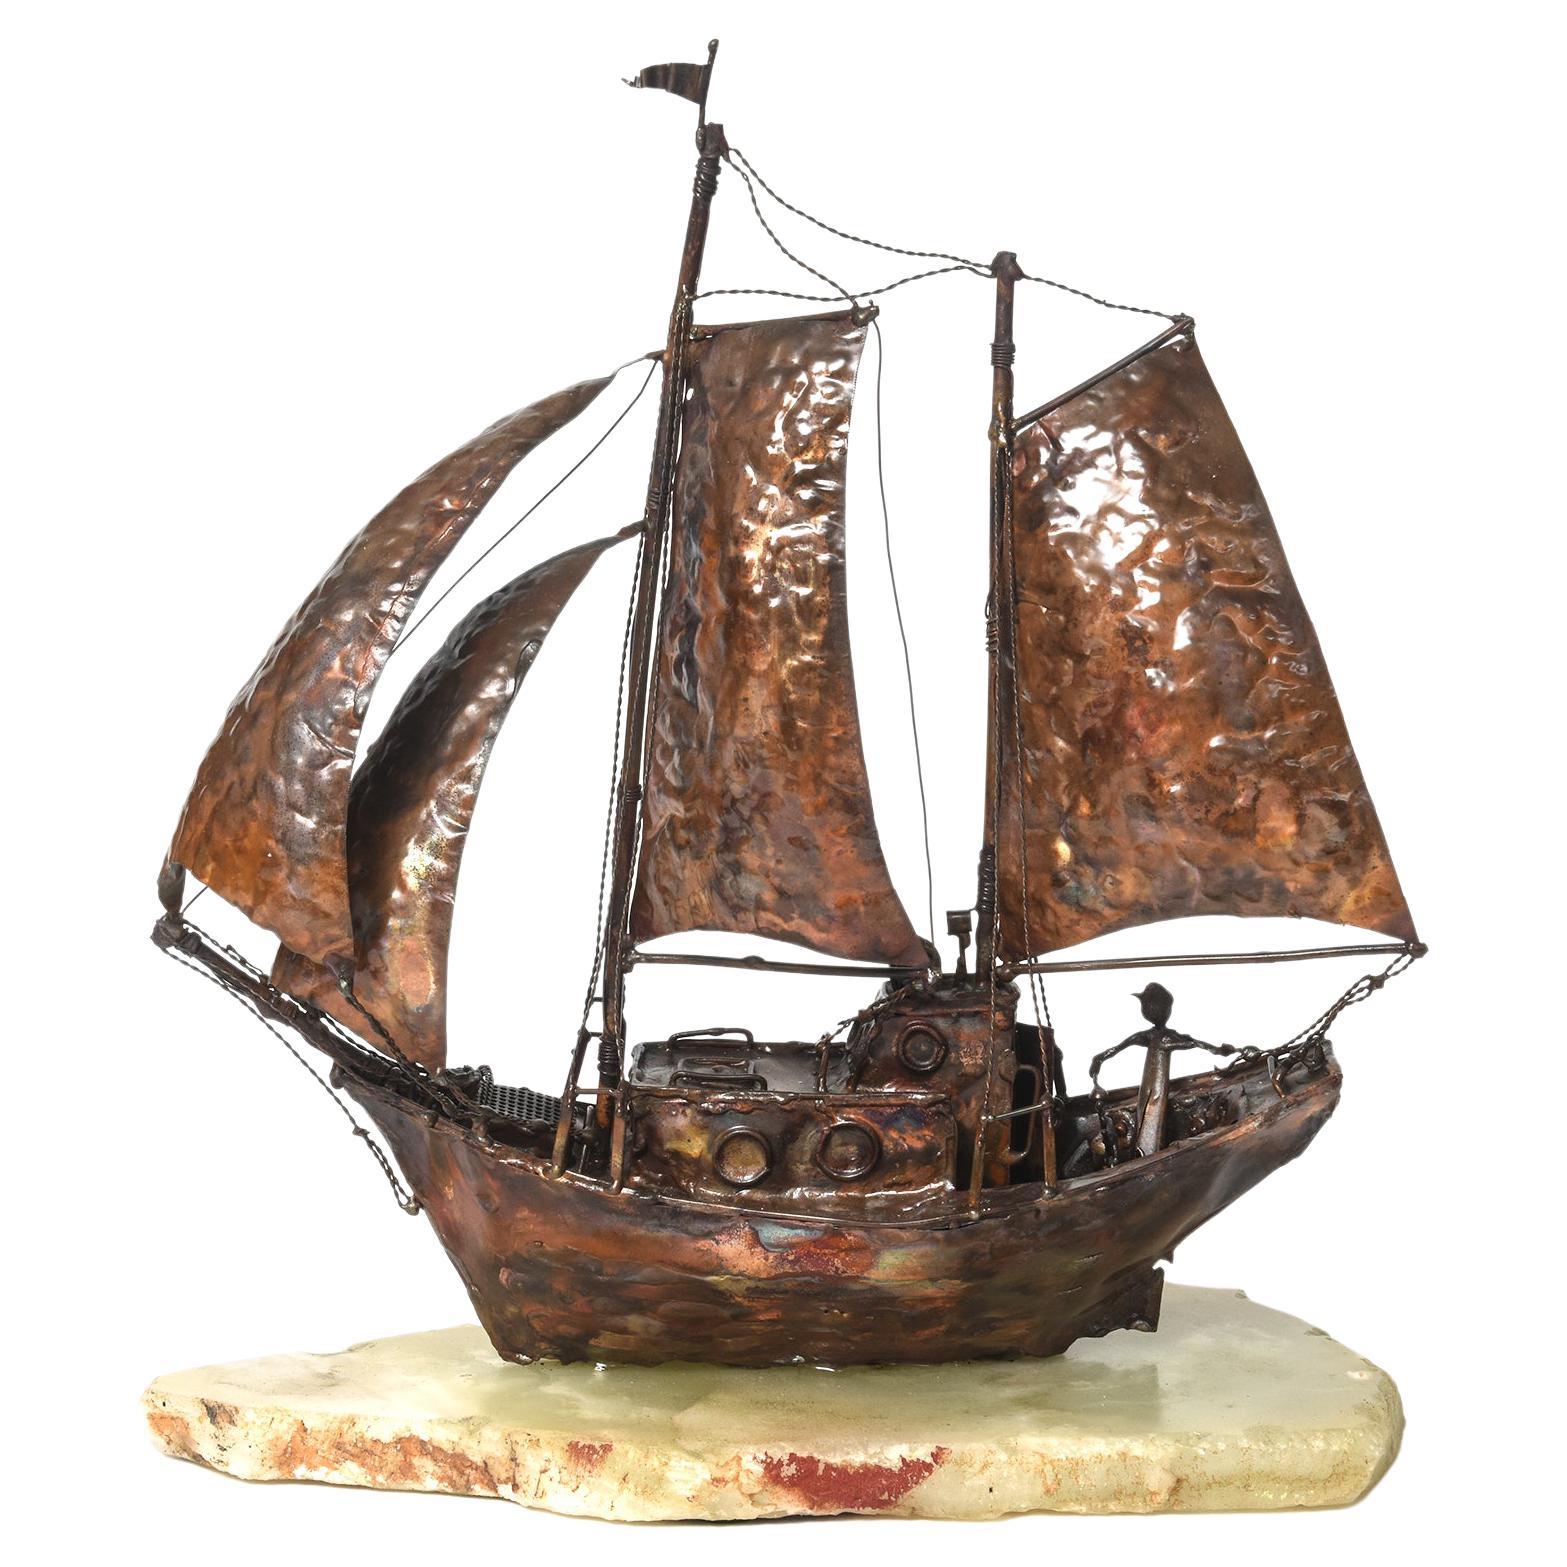 Copper Boat - 9 For Sale on 1stDibs | copper boats